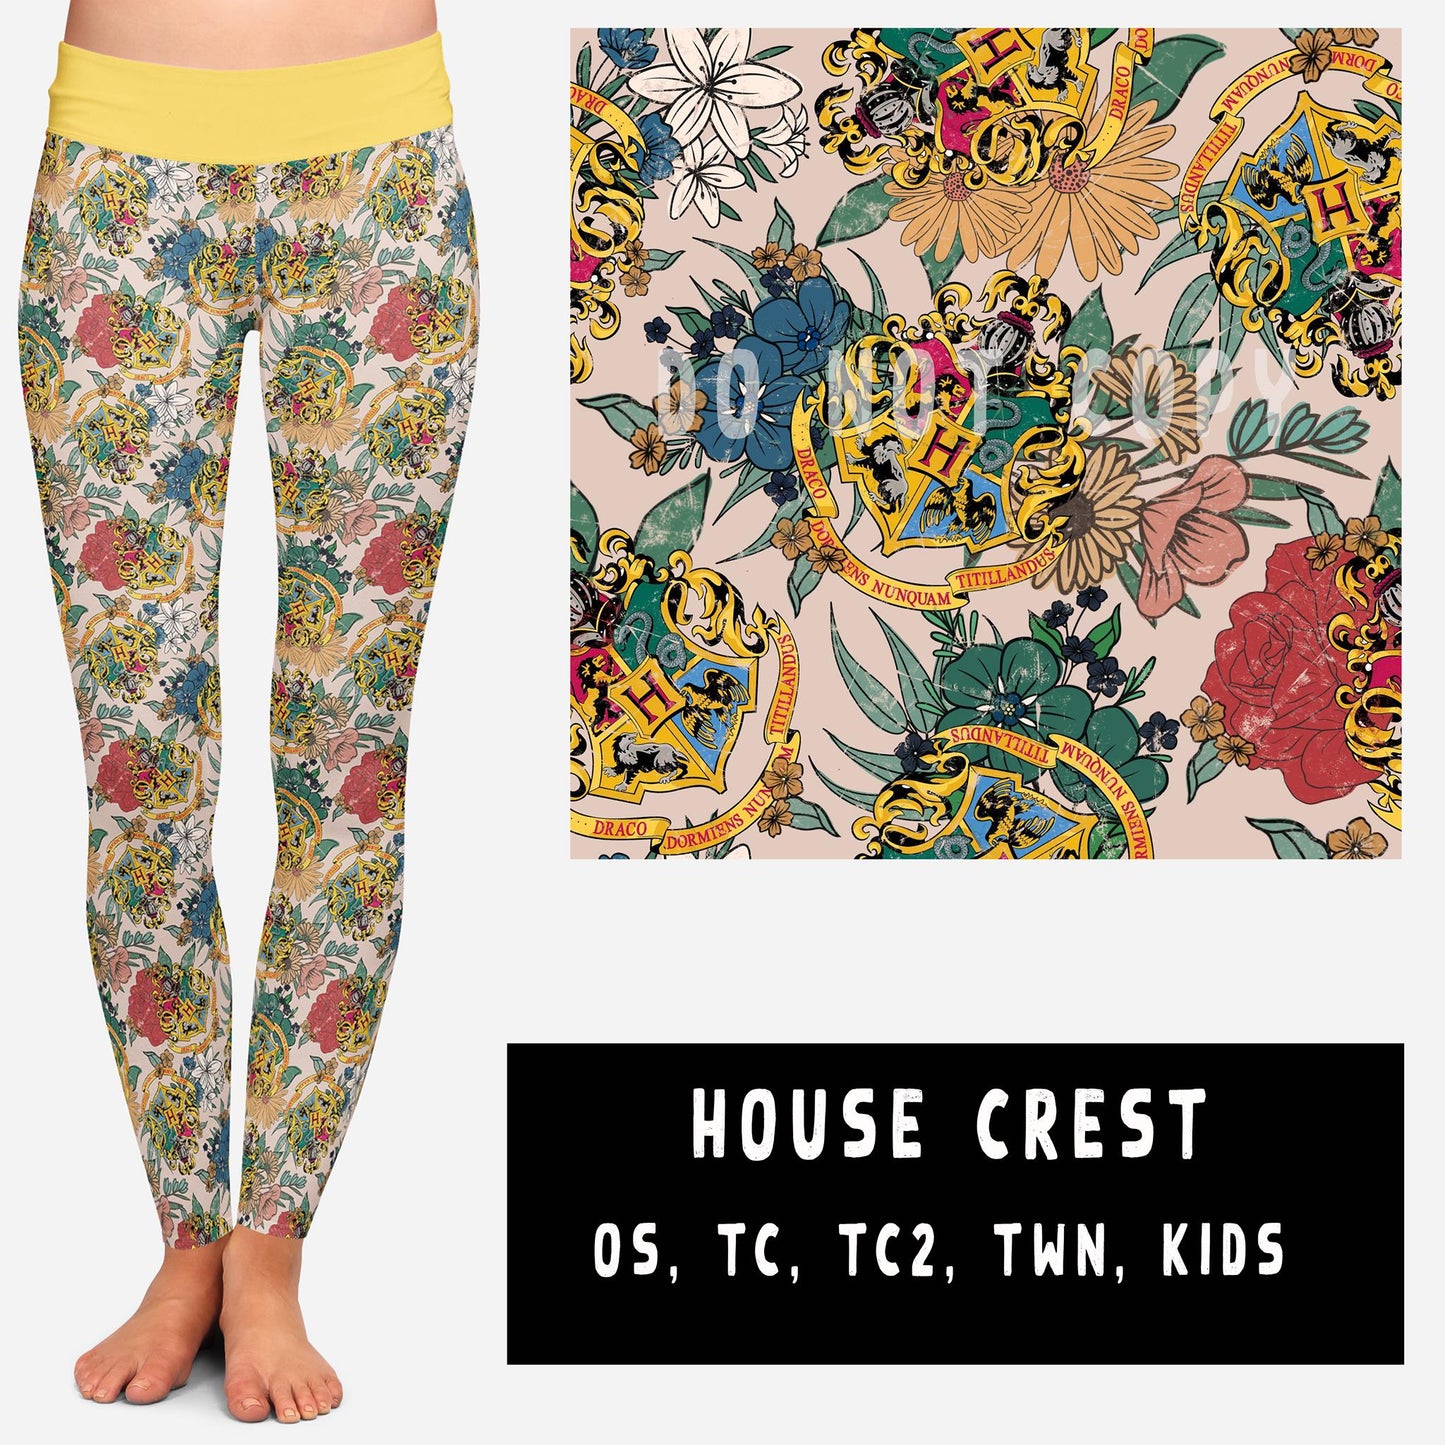 OUTFIT RUN 3-HOUSE CREST